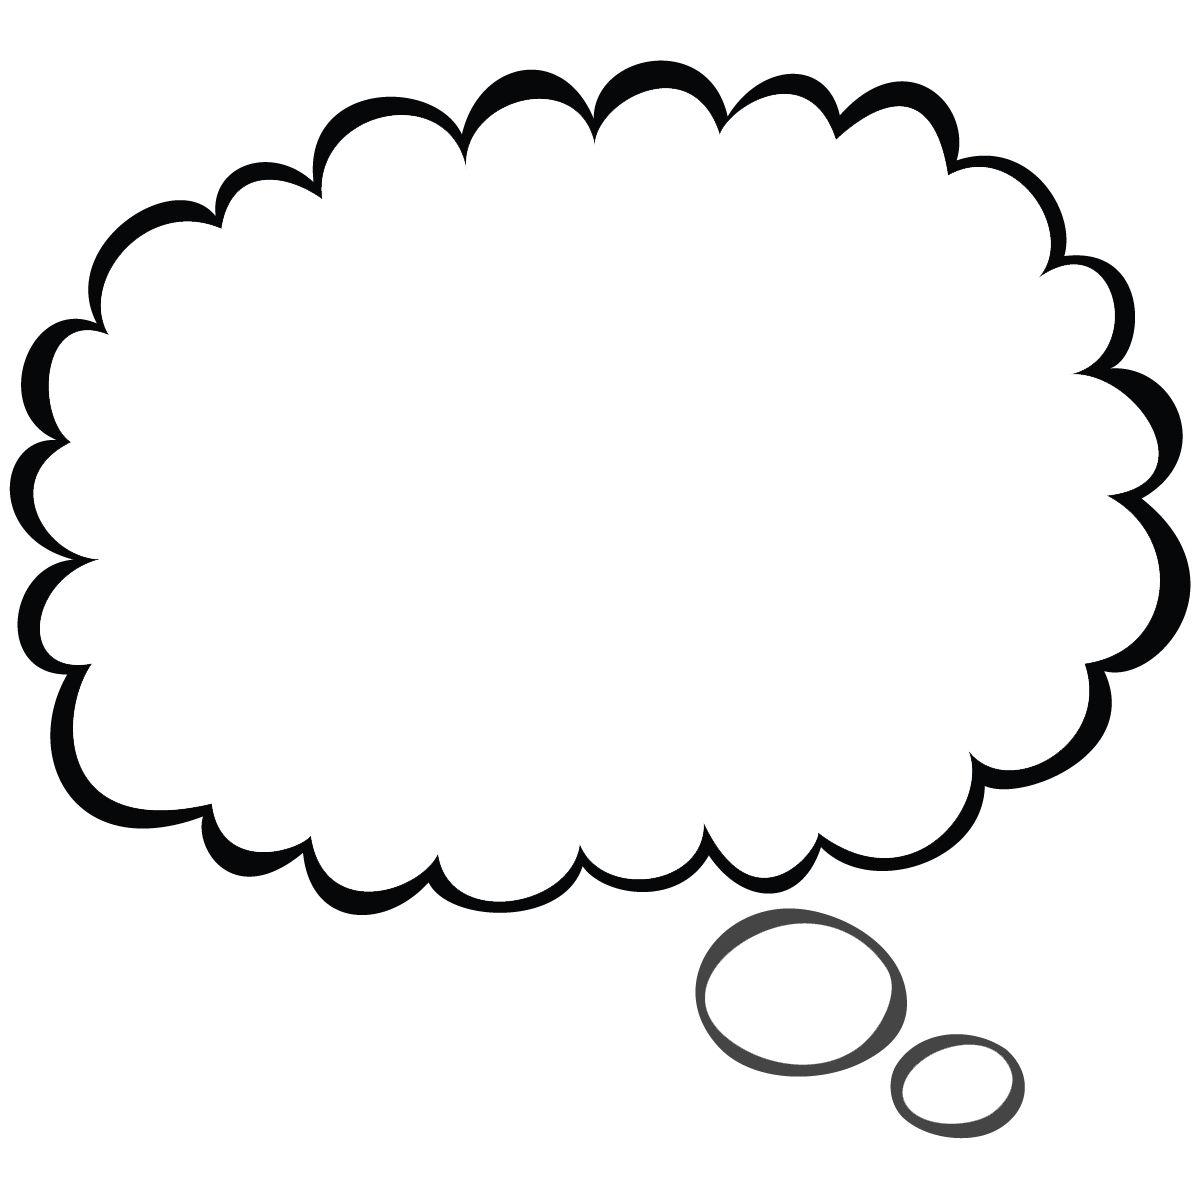 Thought Bubble Free Download PNG 